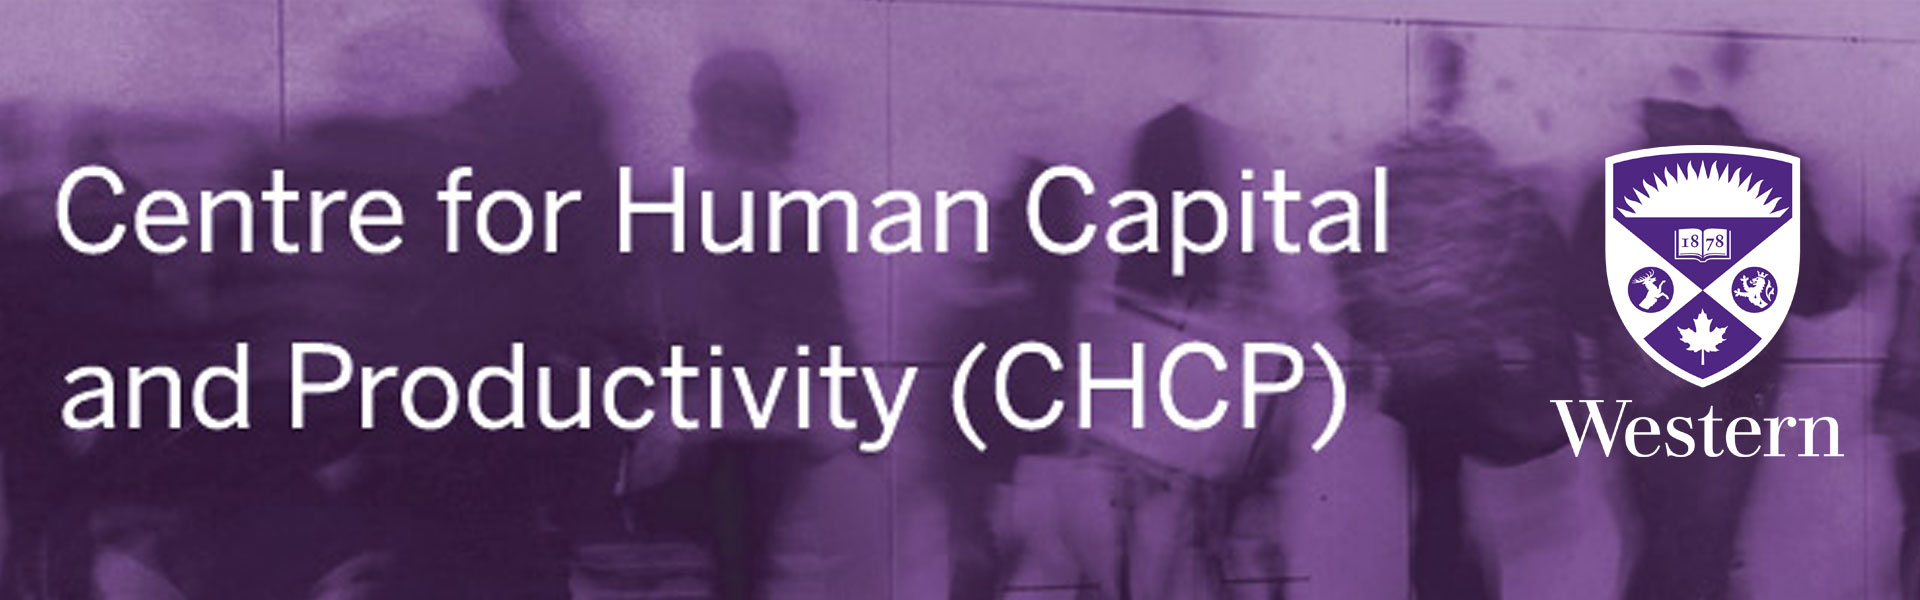 Centre for Human Capital and Productivity